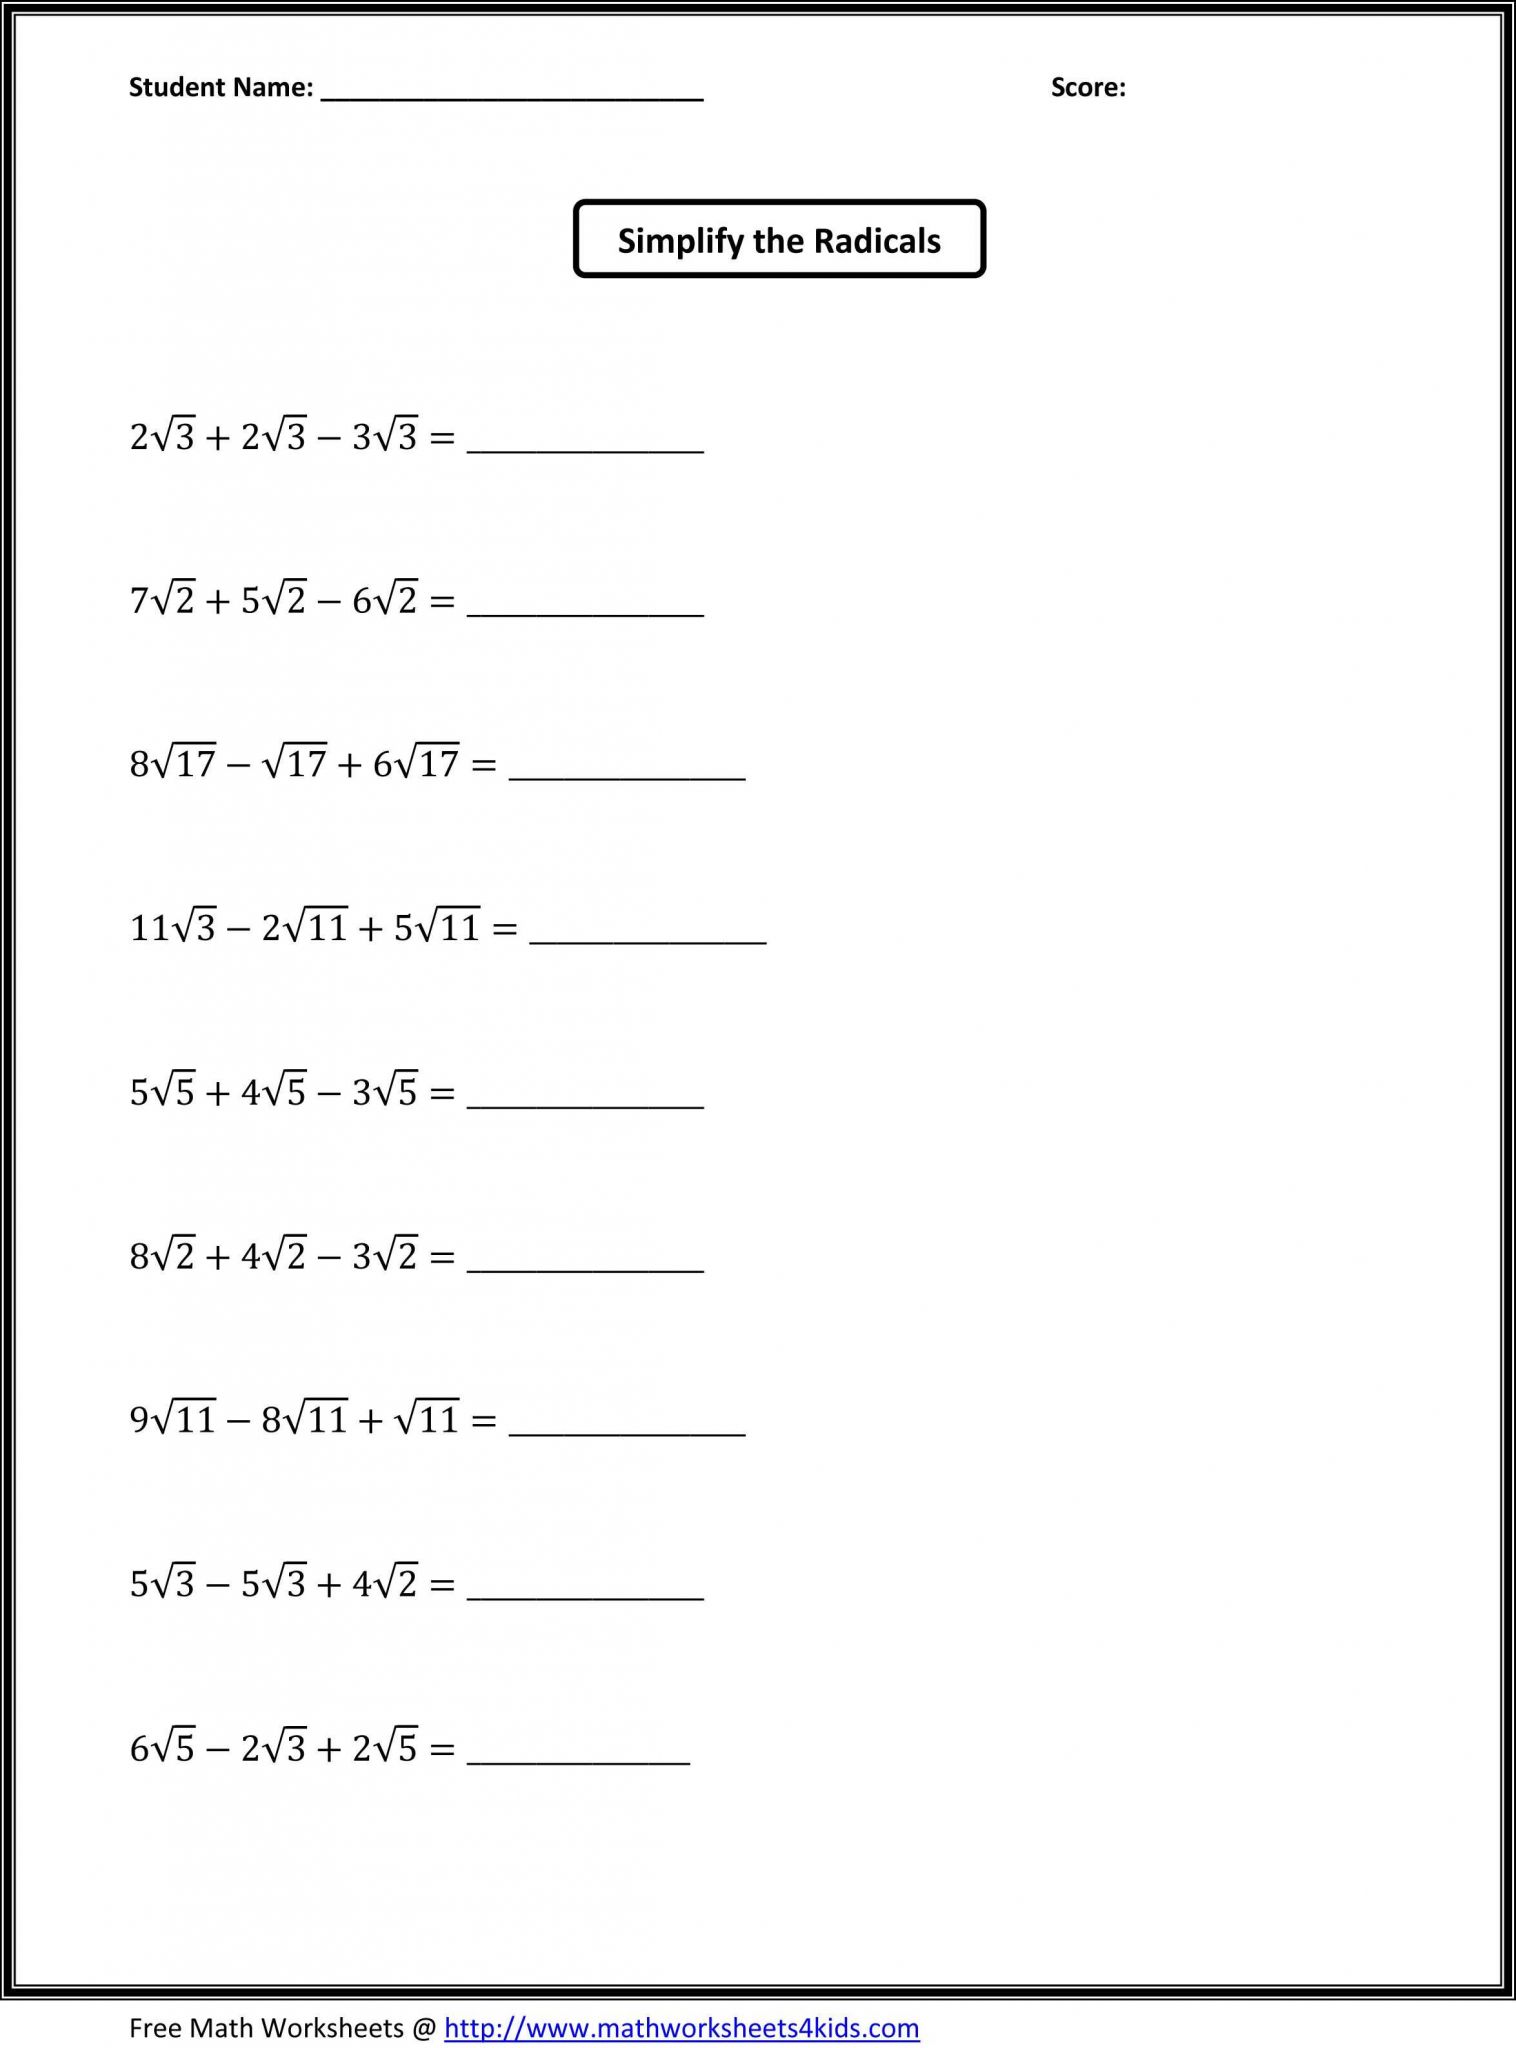 Trigonometry Practice Worksheets as Well as 6th Grade Math Worksheets